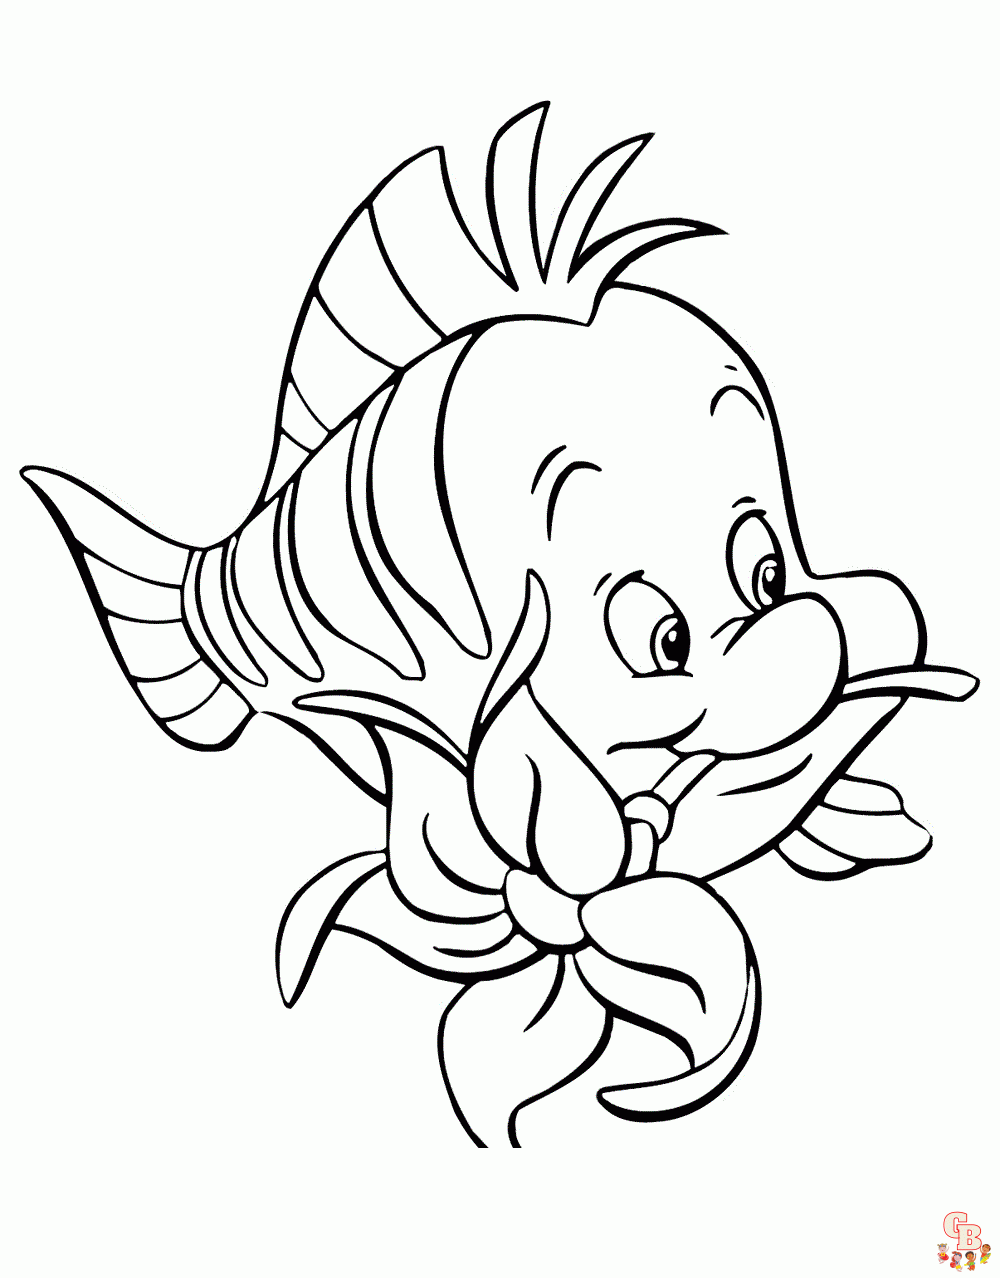 Flounder coloring pages 1